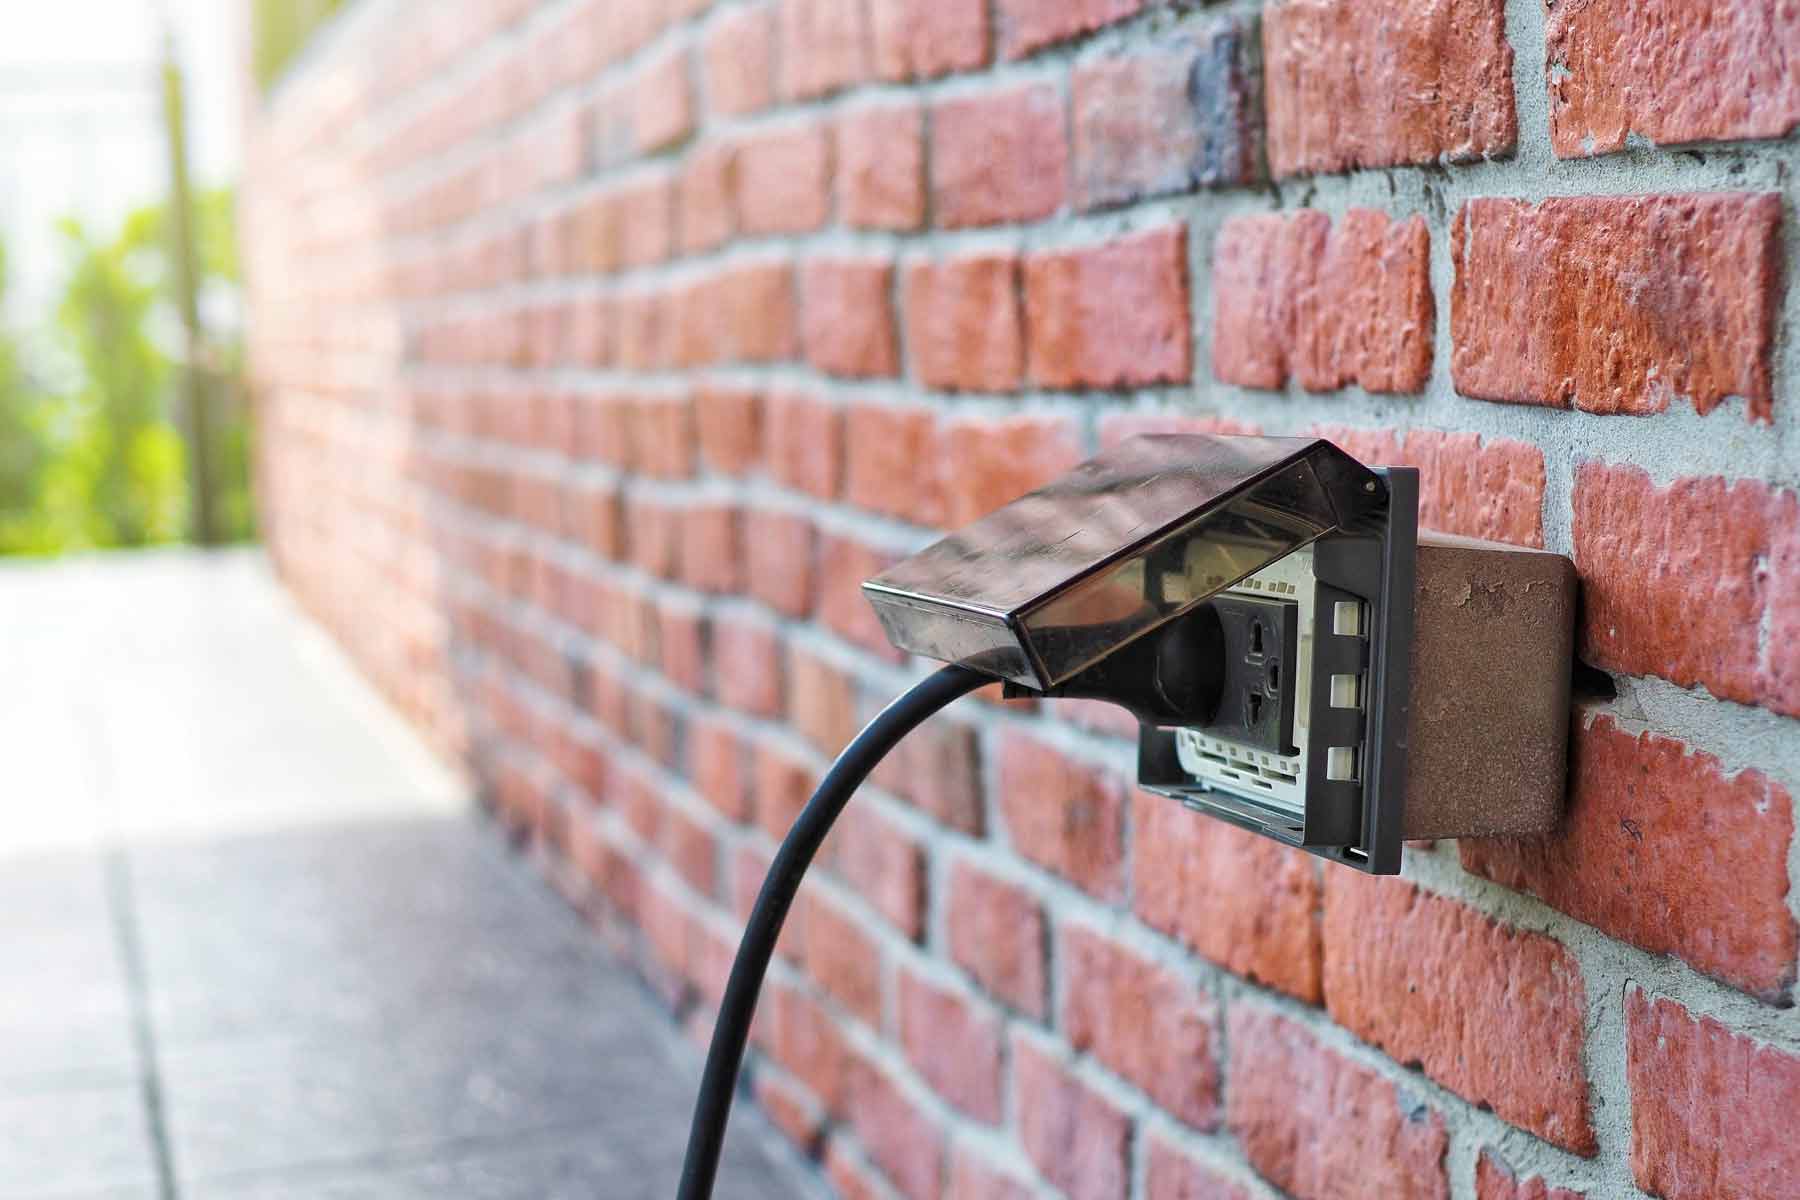 How To Fix An Outdoor Outlet That Has No Power